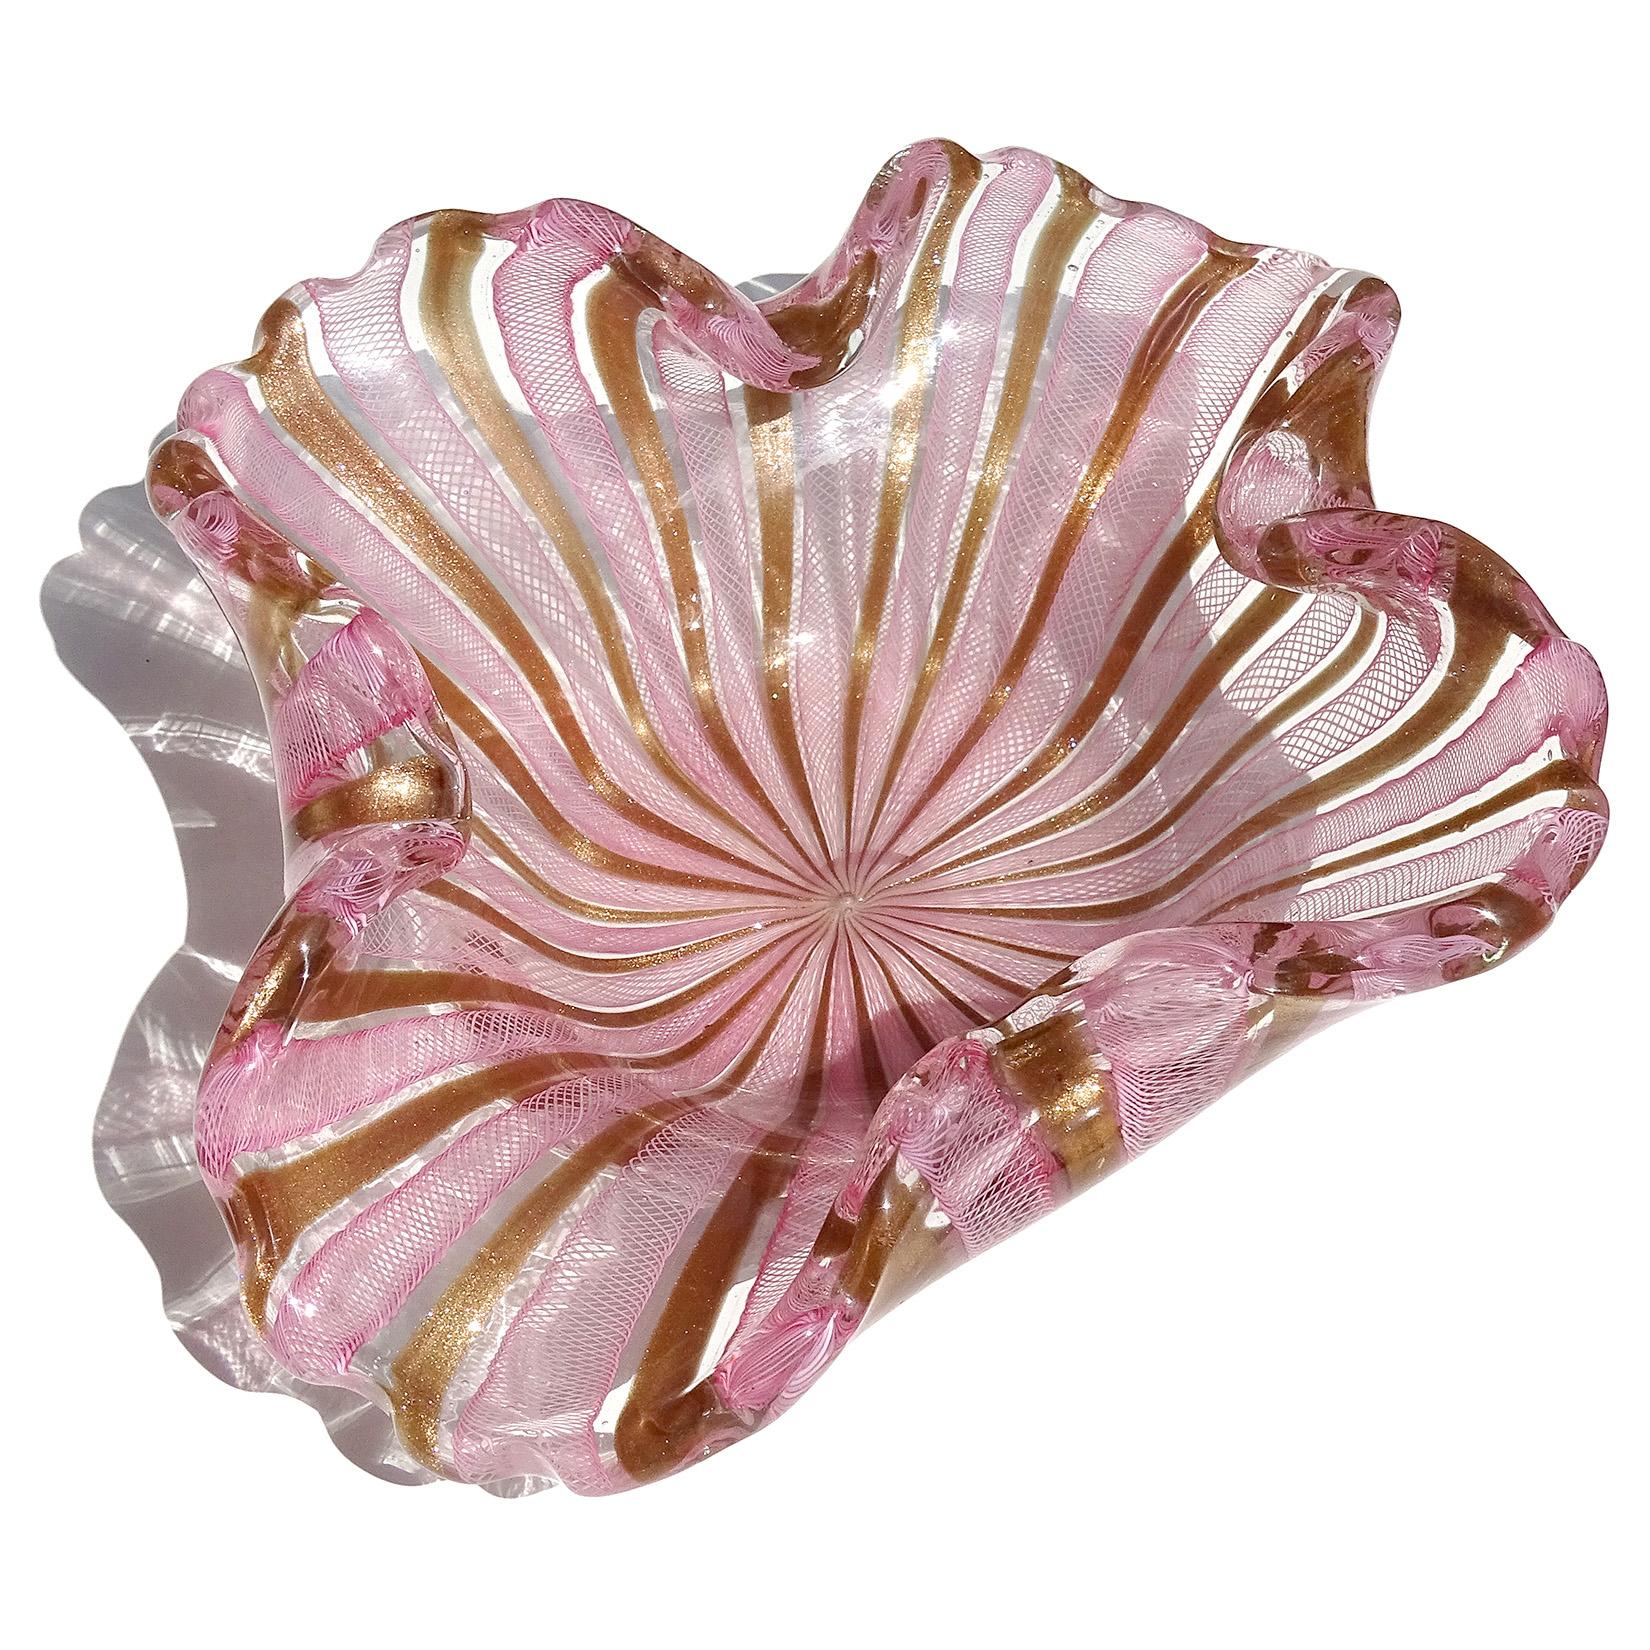 Beautiful and large, vintage Murano hand blown pink Zanfirico ribbons and copper aventurine bands Italian art glass decorative centerpiece bowl. Documented to the Fratelli Toso company. Has a ruffled and folded rim. Very intricate tight net design